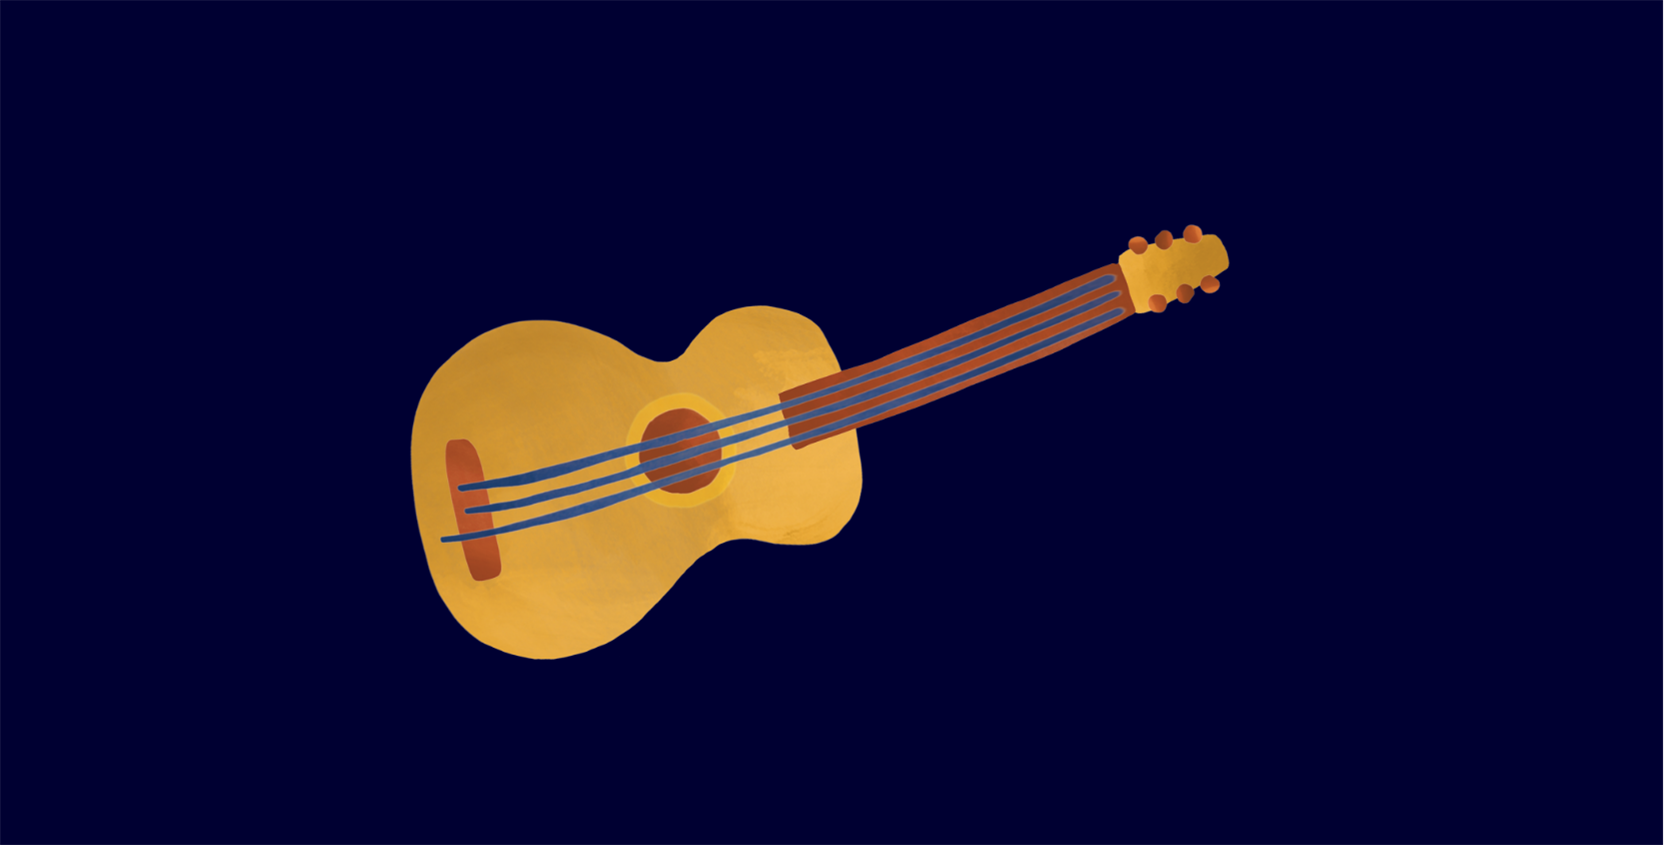 Illustration of a guitar on a blue background